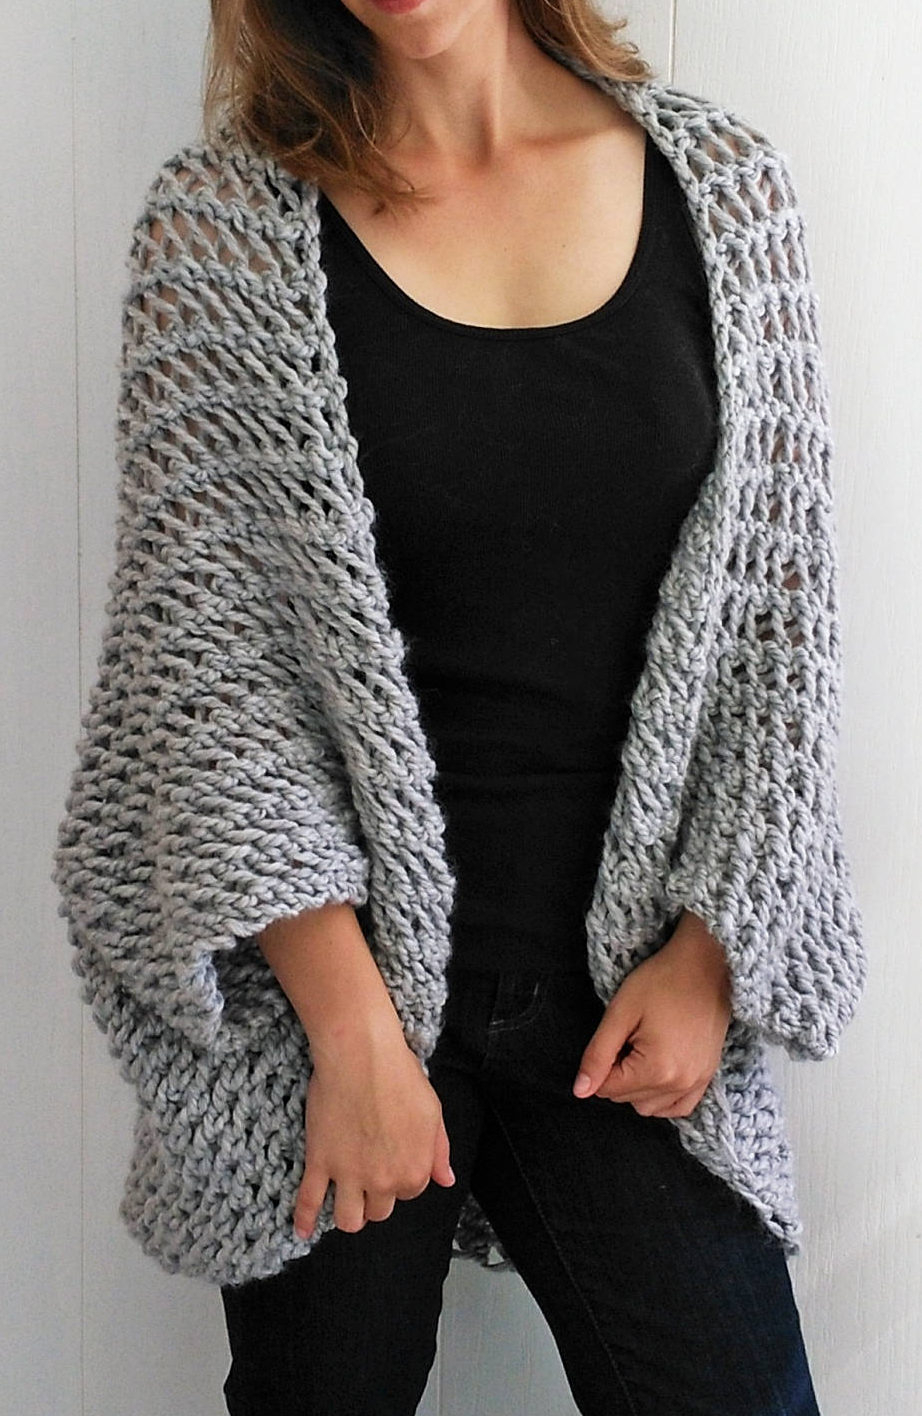 Simple Knit Sweater Pattern Free Easy Cardigan Knitting Patterns In The Loop Knitting